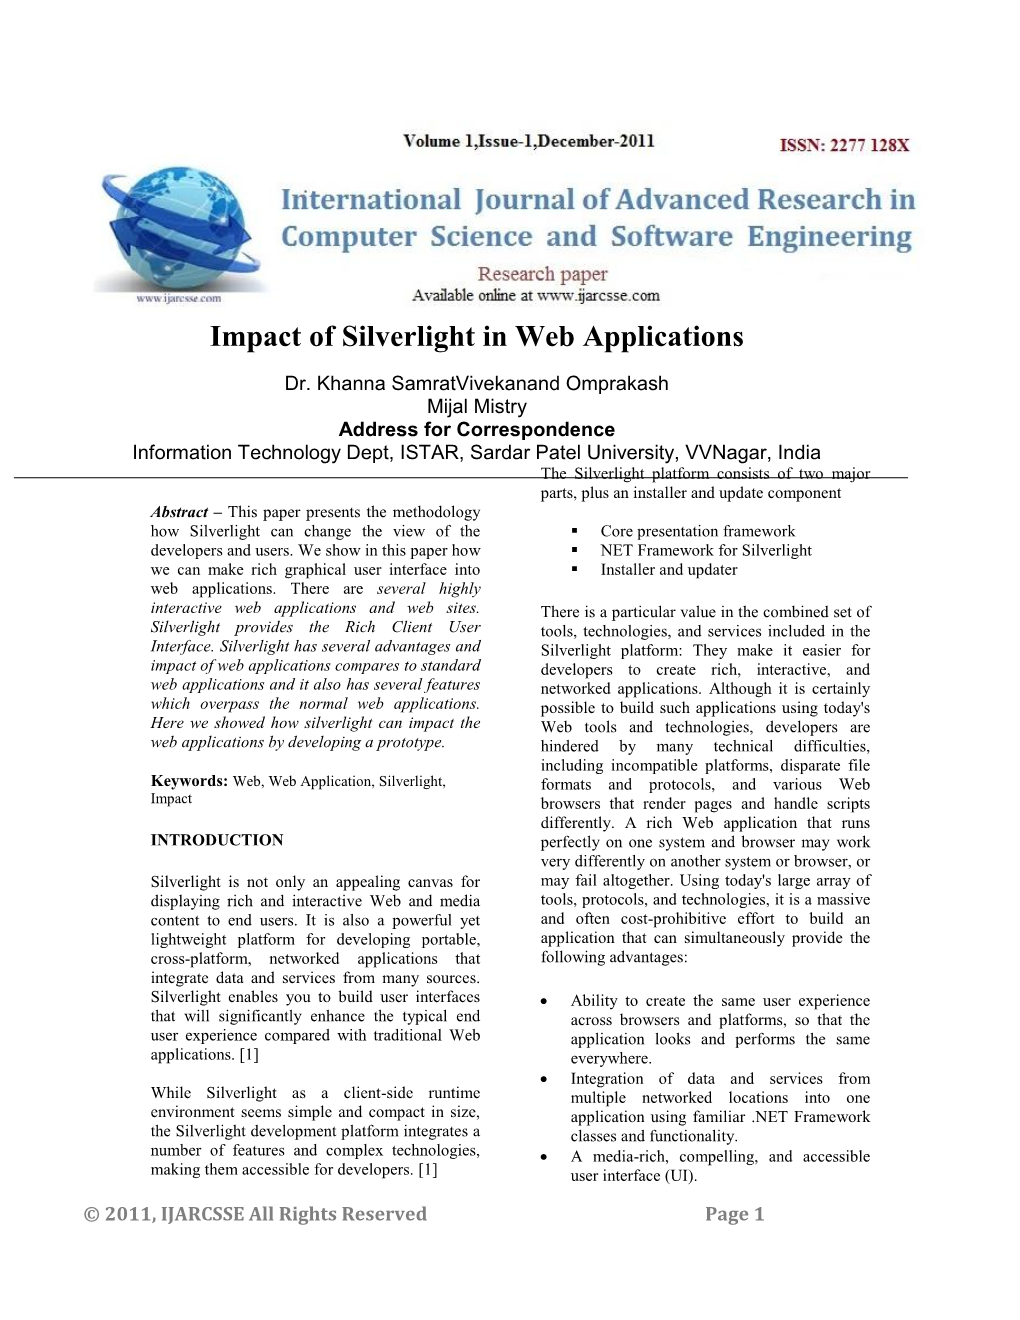 Impact of Silverlight in Web Applications